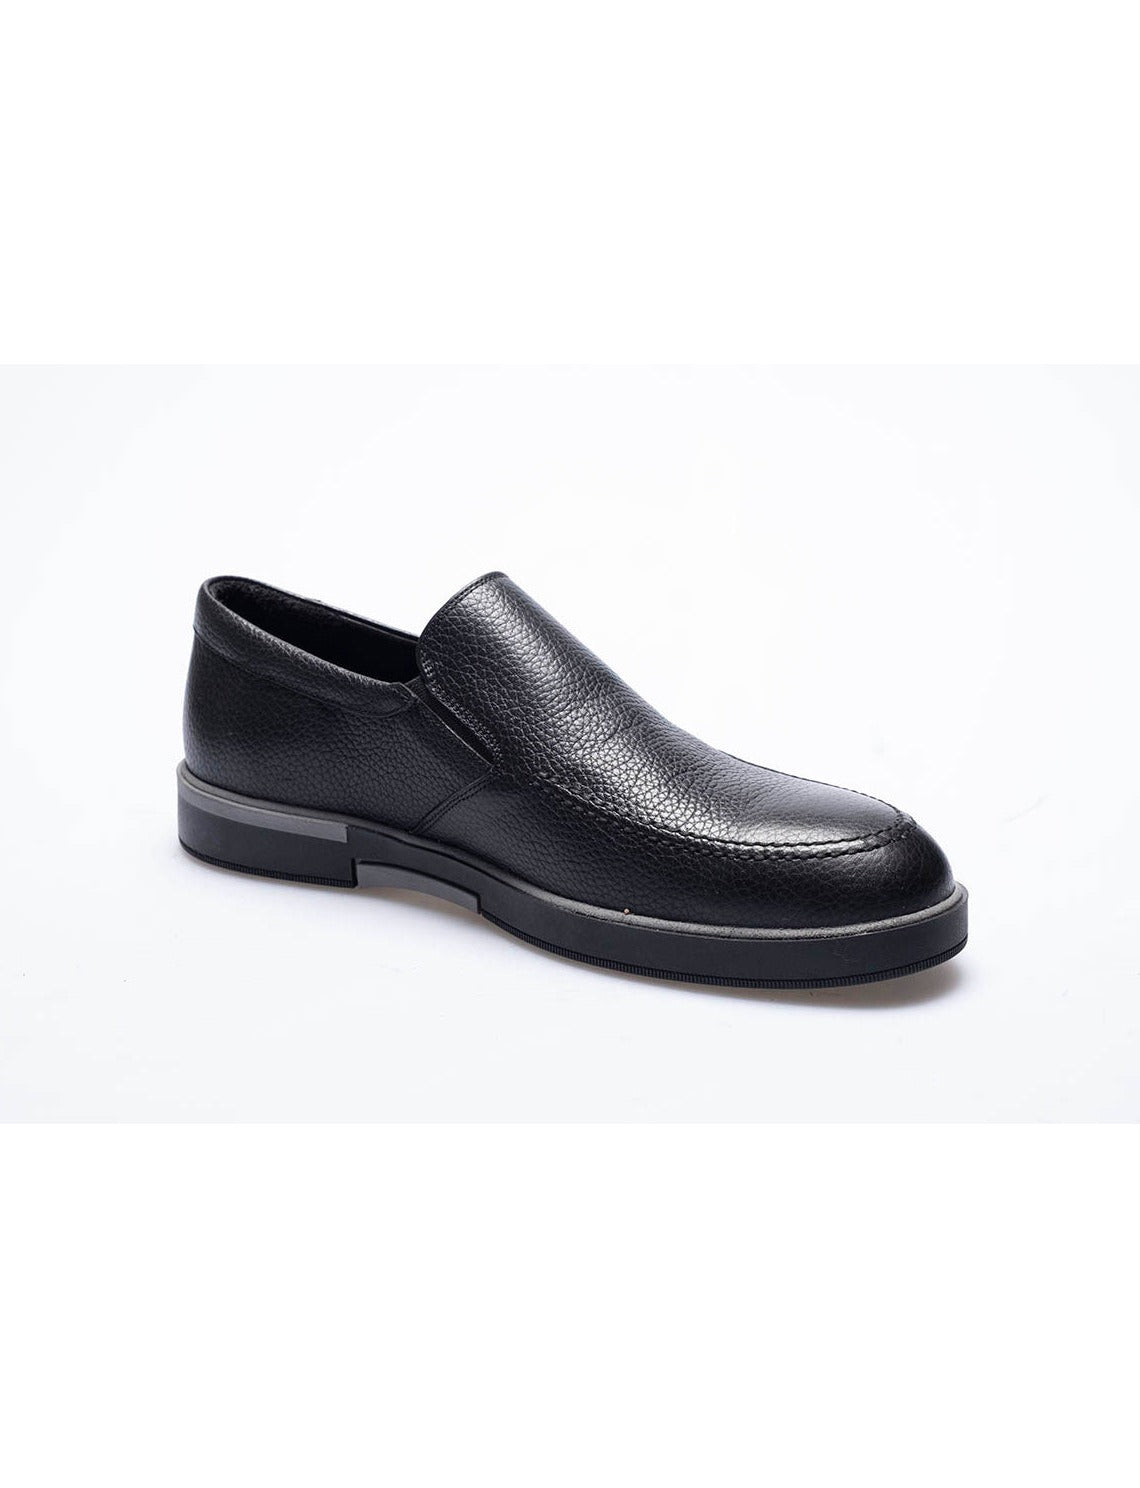 Men Navy Blue Genuine Leather  Classic Shoes